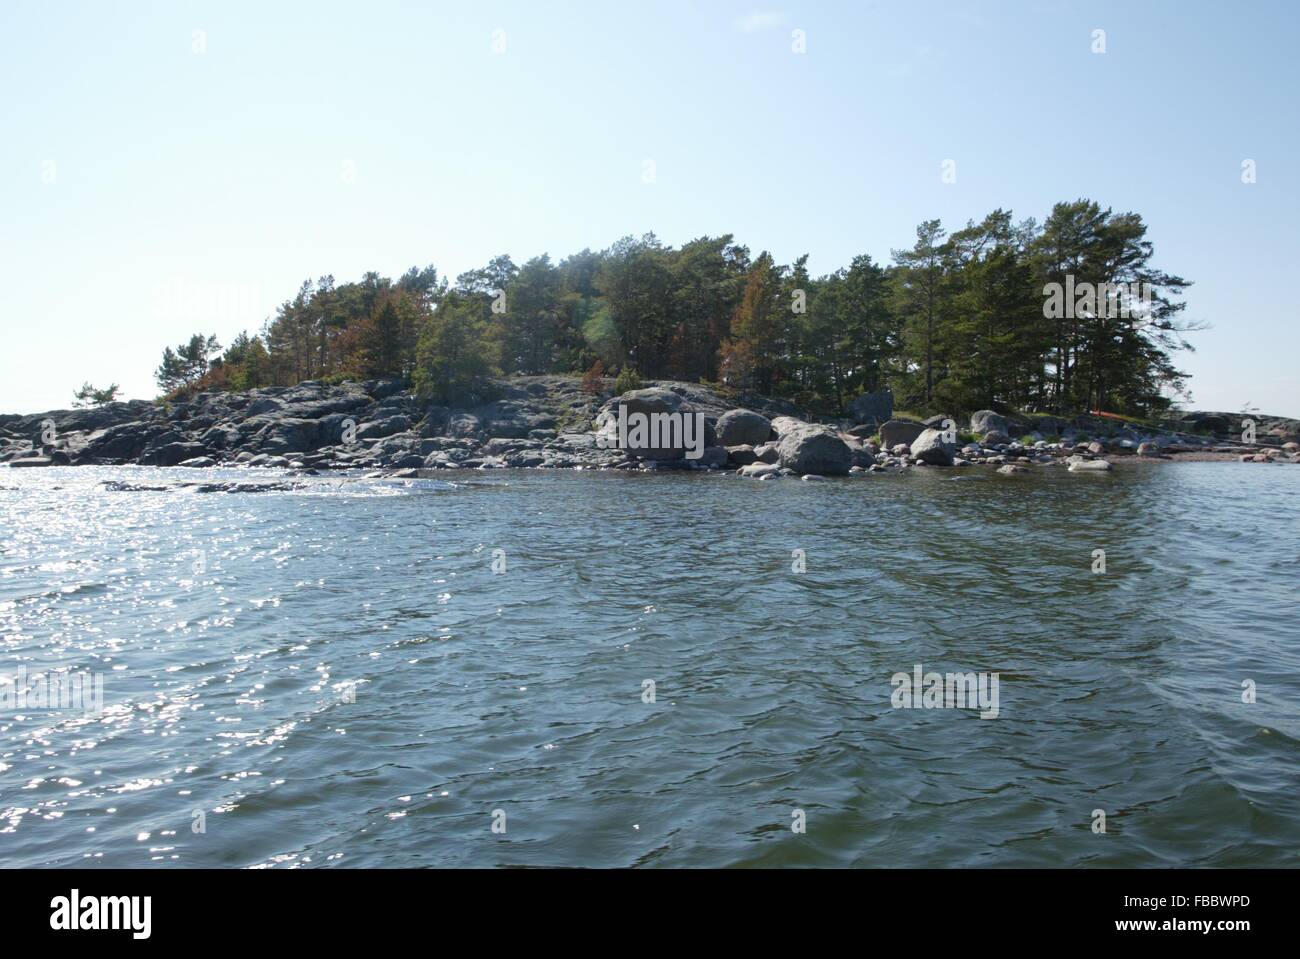 Island of Klovharu, a small rocky island where Tovi Jansson artist, and her partner Tuulikki Pietilä spent their summers for close to 30 years , until the 1990's. The Island is featured in the world famous 'Moomin' books and where Tovi Jansson wrote 'The Summer Book' (1972) and 'Notes From an Island (1976), Finland, Scandinavia. Stock Photo